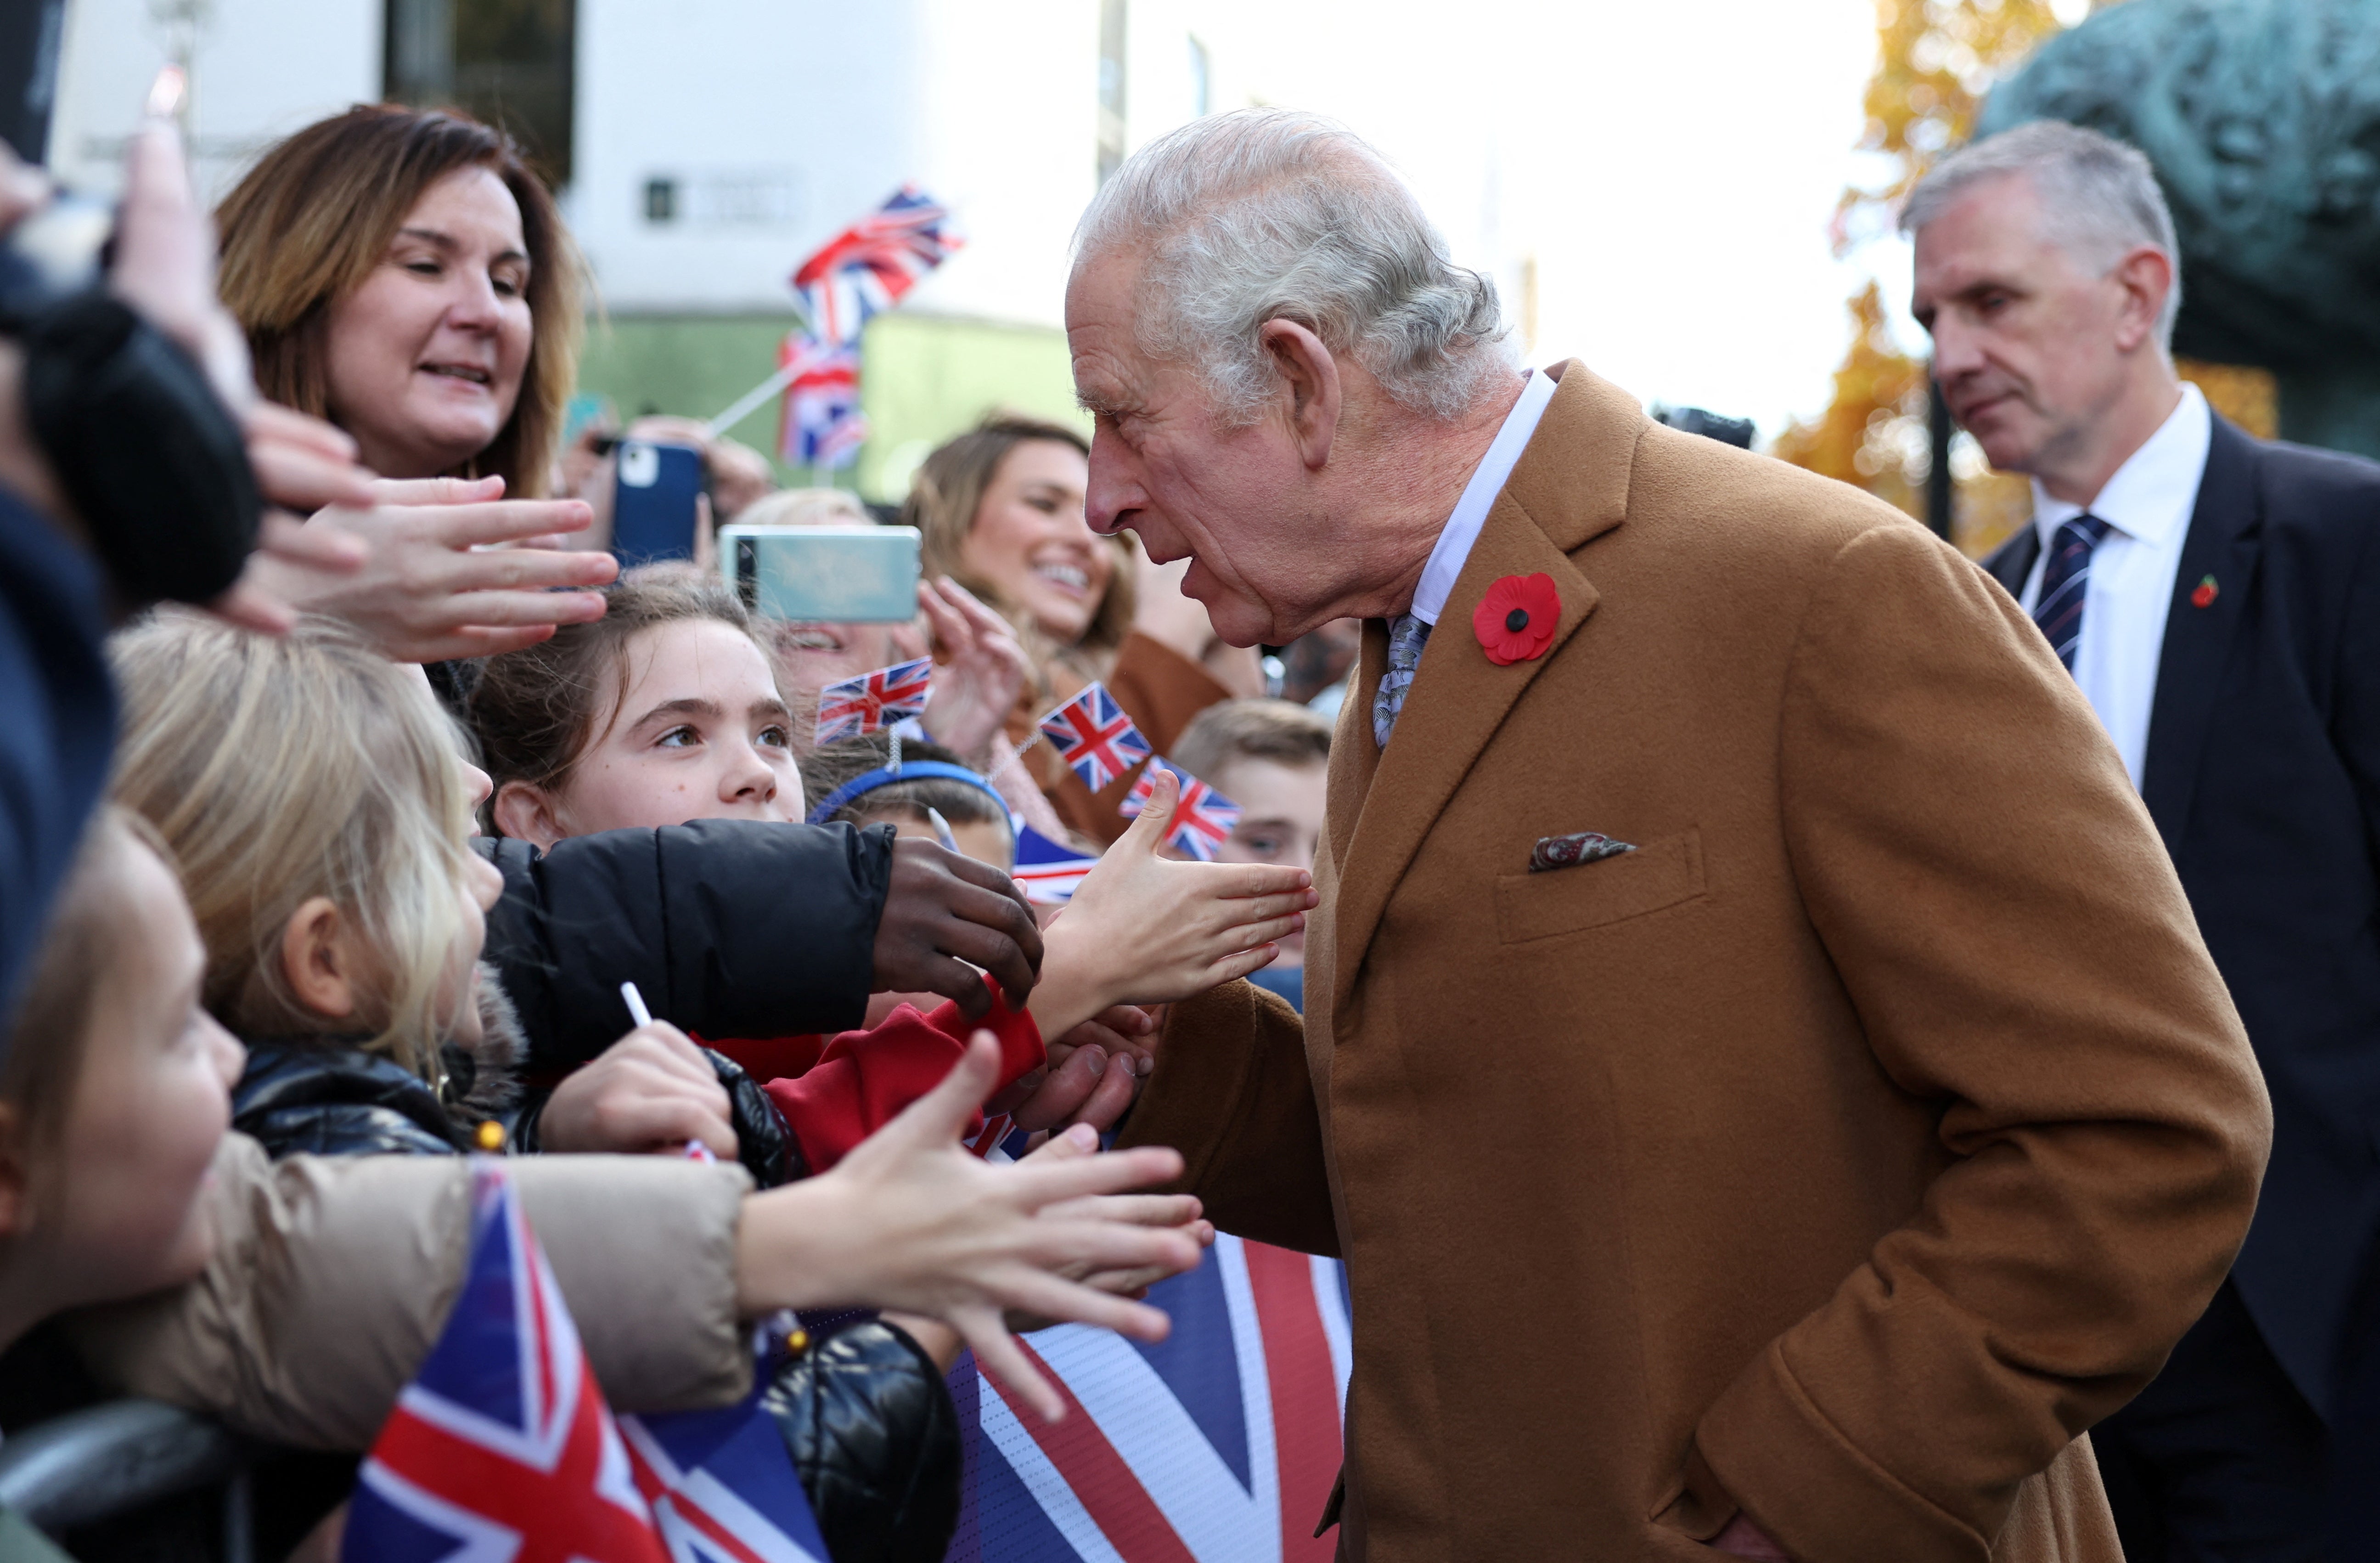 People who support the monarchy can turn out to cheer and wave – that is their choice